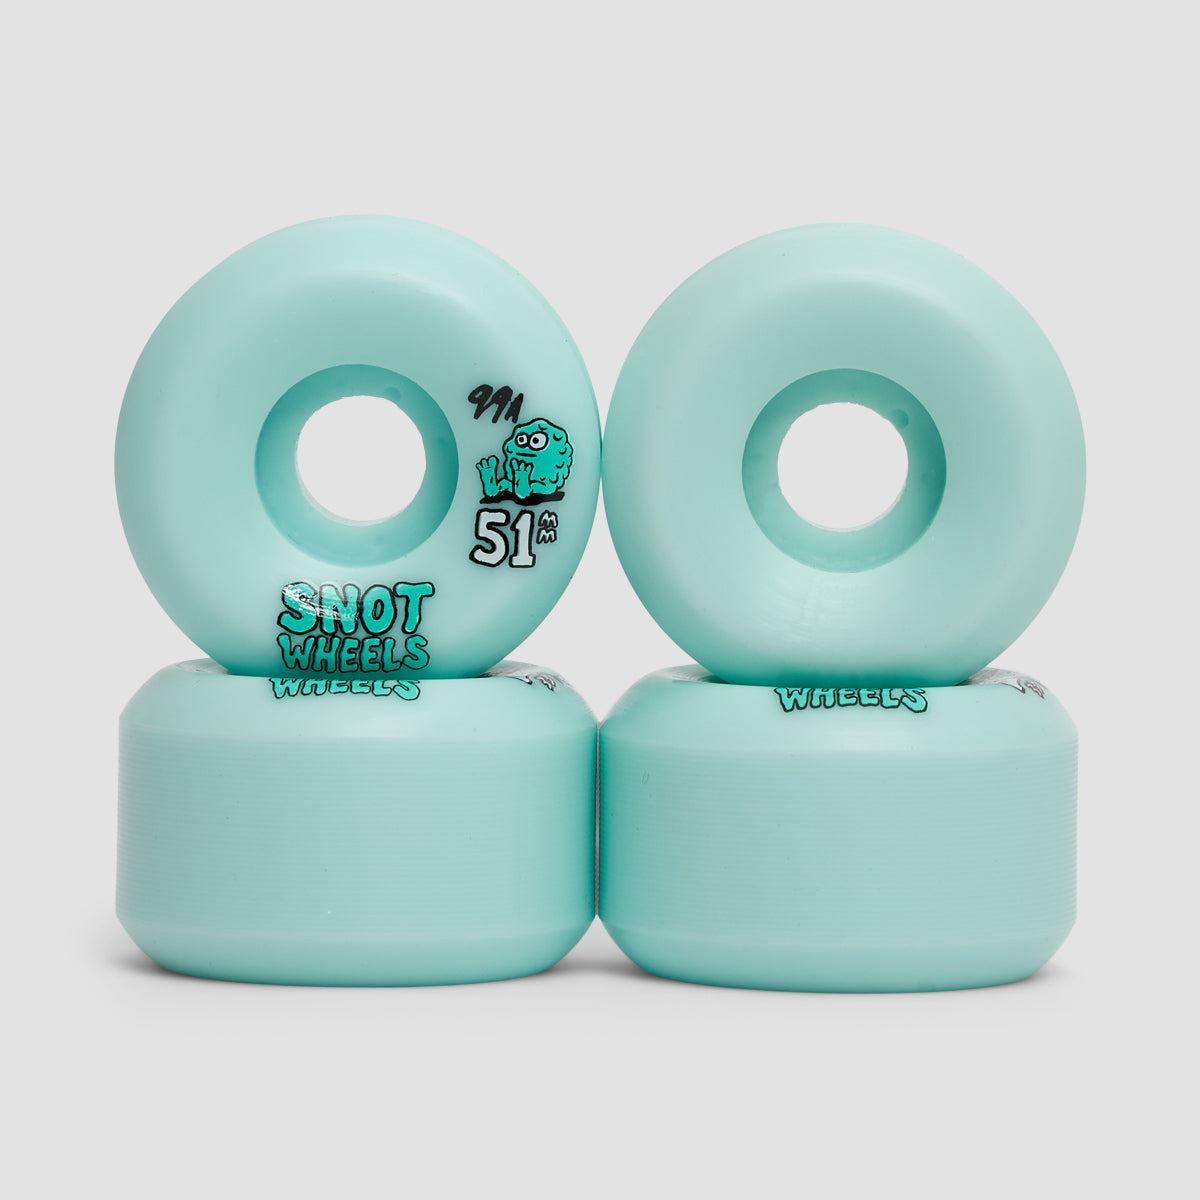 Snot Team 99A Conical Skateboard Wheels Pale Teal 51mm